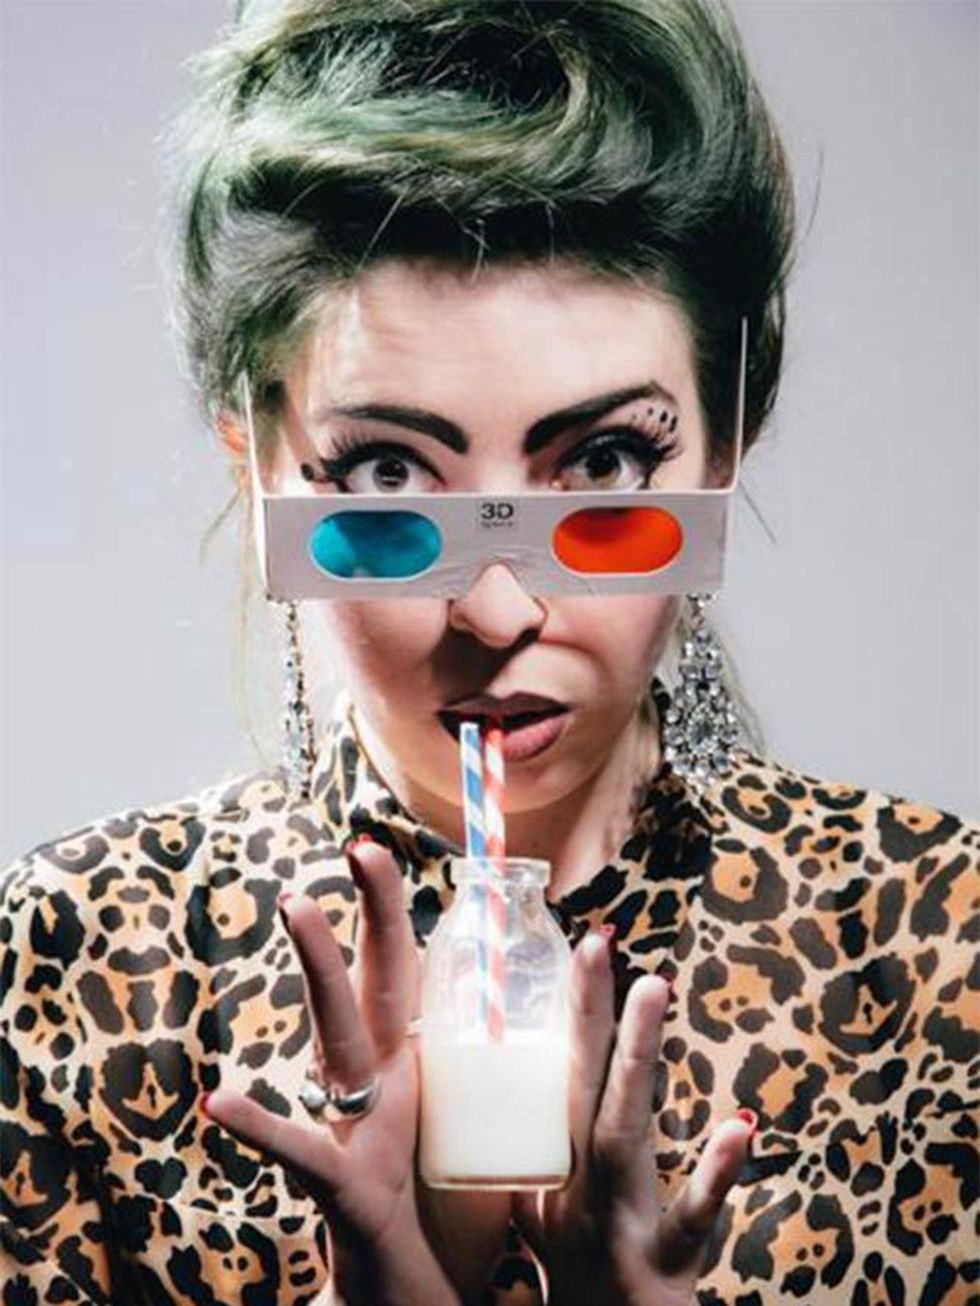 <p>COMEDY: Friday Night Freaks, Southbank</p>

<p>How many Friday nights can you describe as twisted, glitzy, shocking and downright bizarre? OK, dont answer that But no matter how unusual your Fridays may be (hey, were not here to judge), were bettin